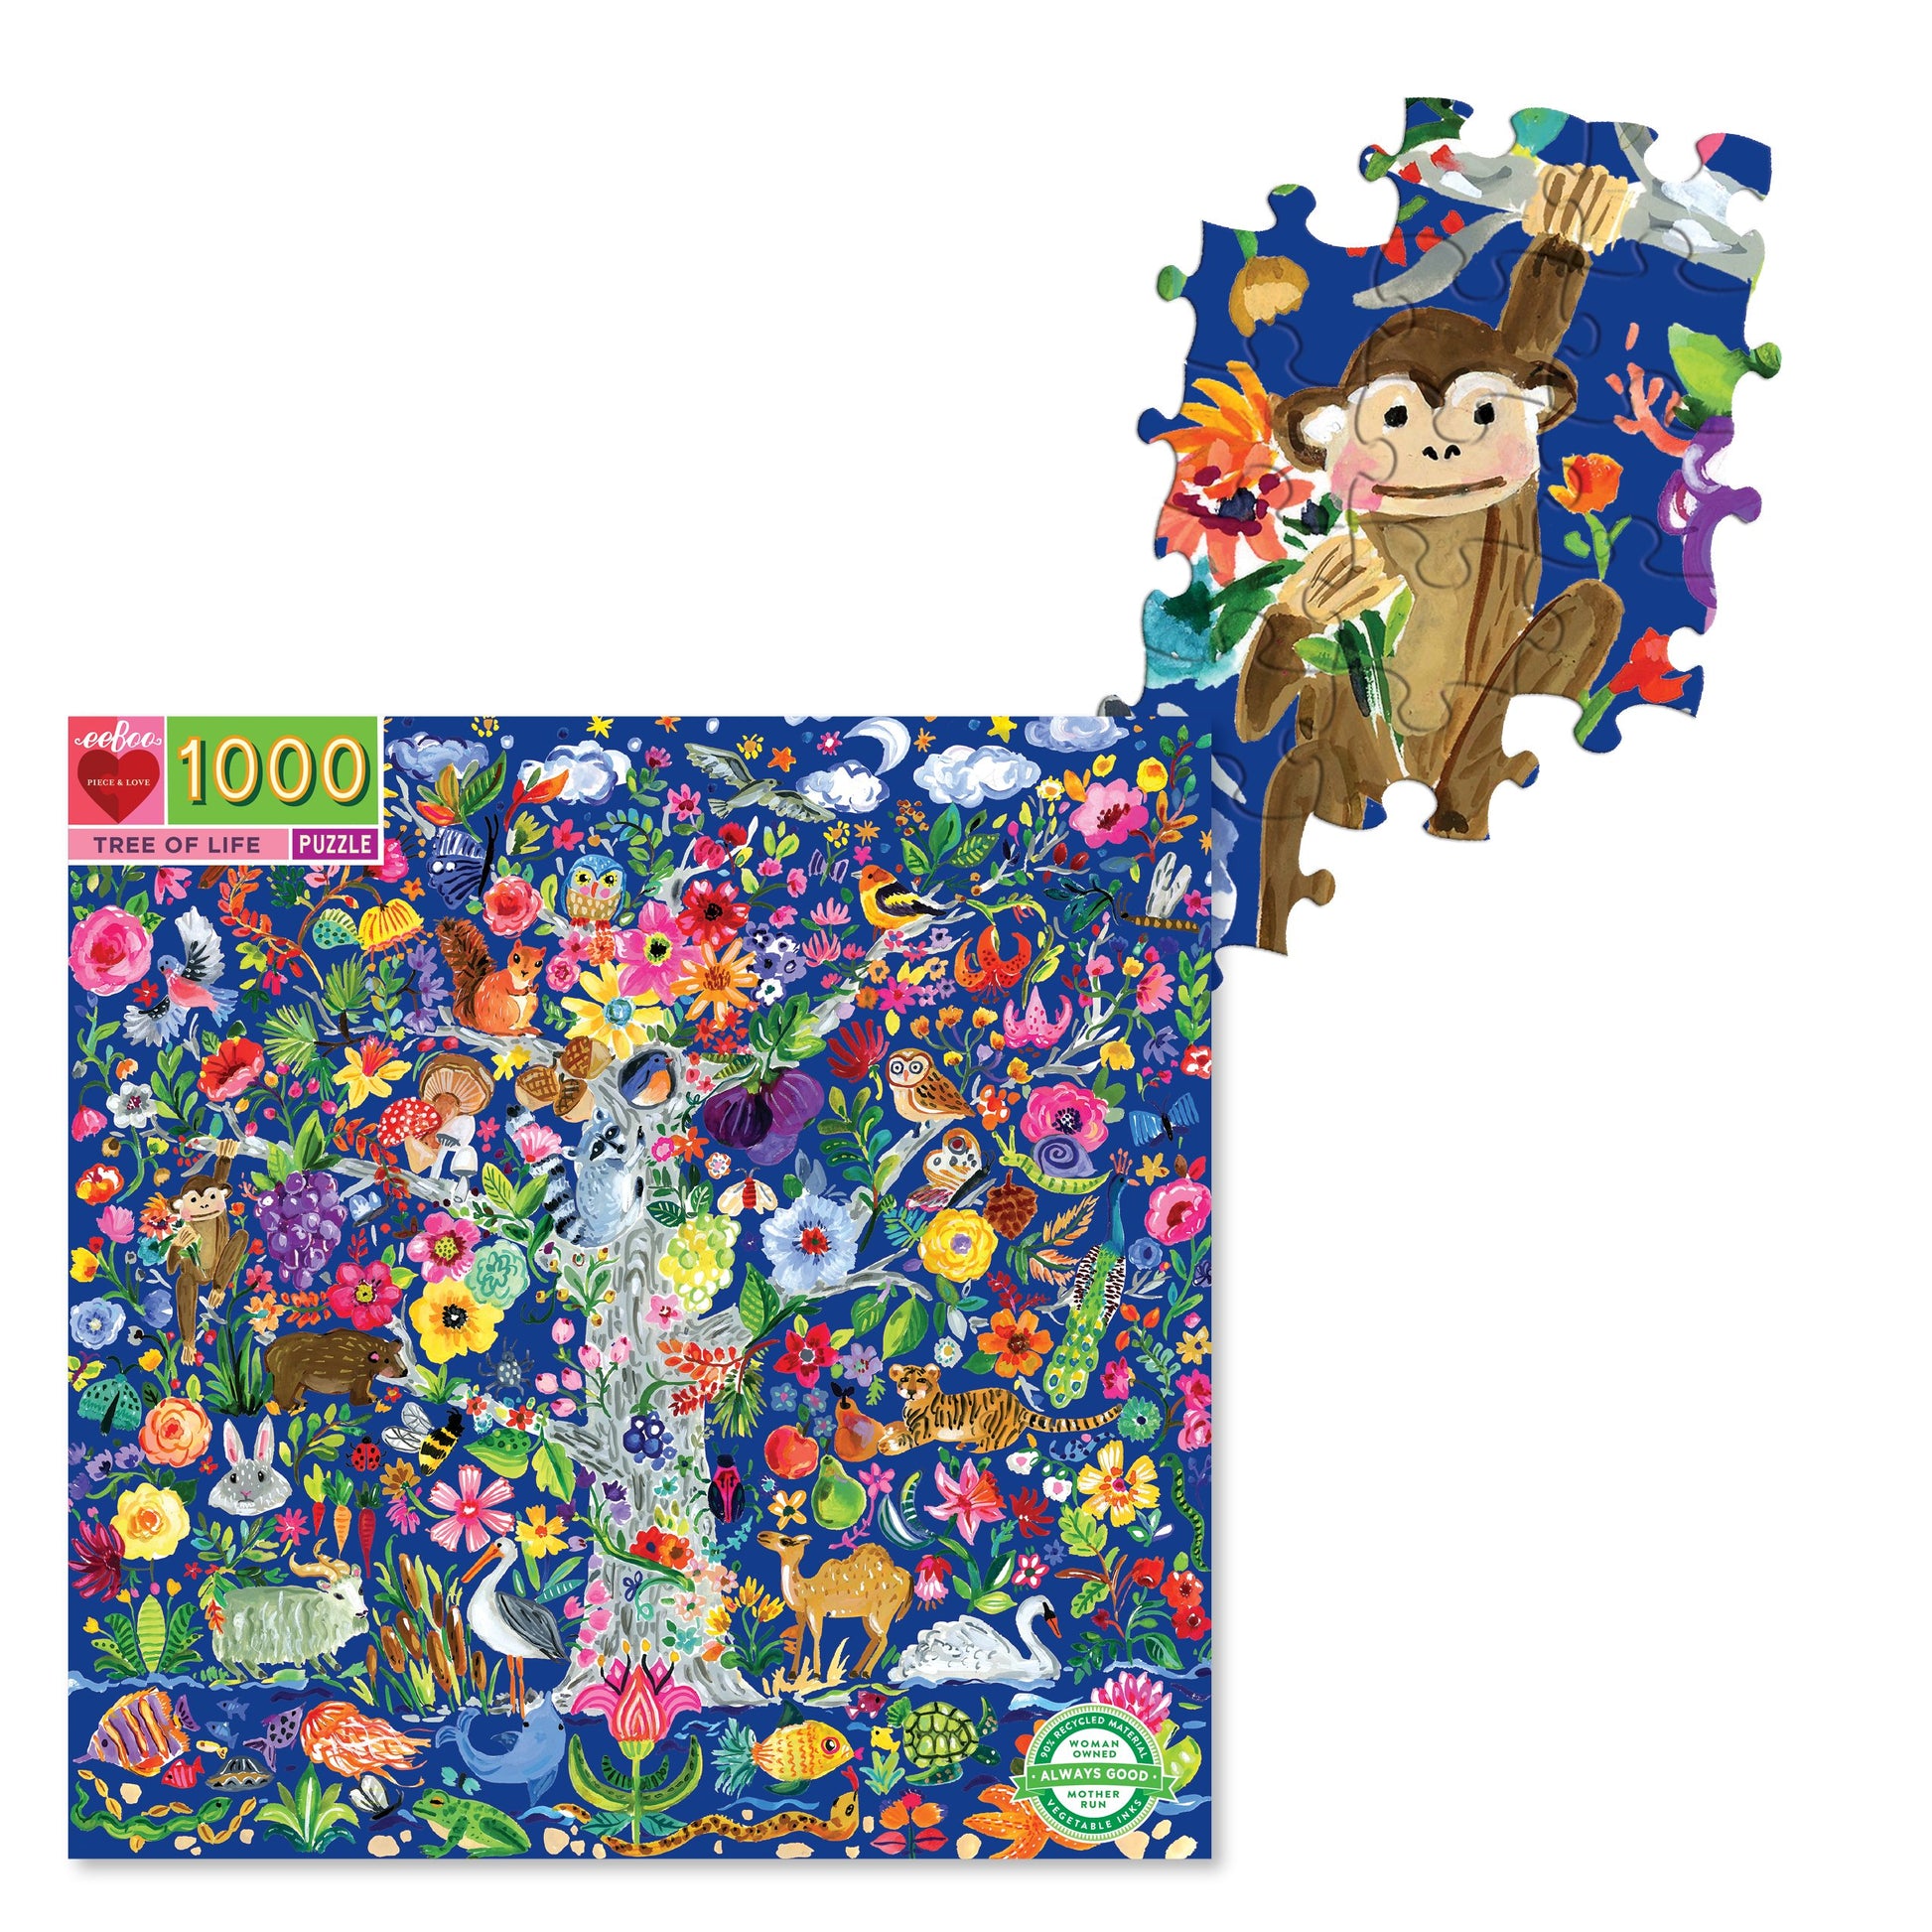 eeBoo 1000pc Puzzle Tree of Life The Toy Wagon